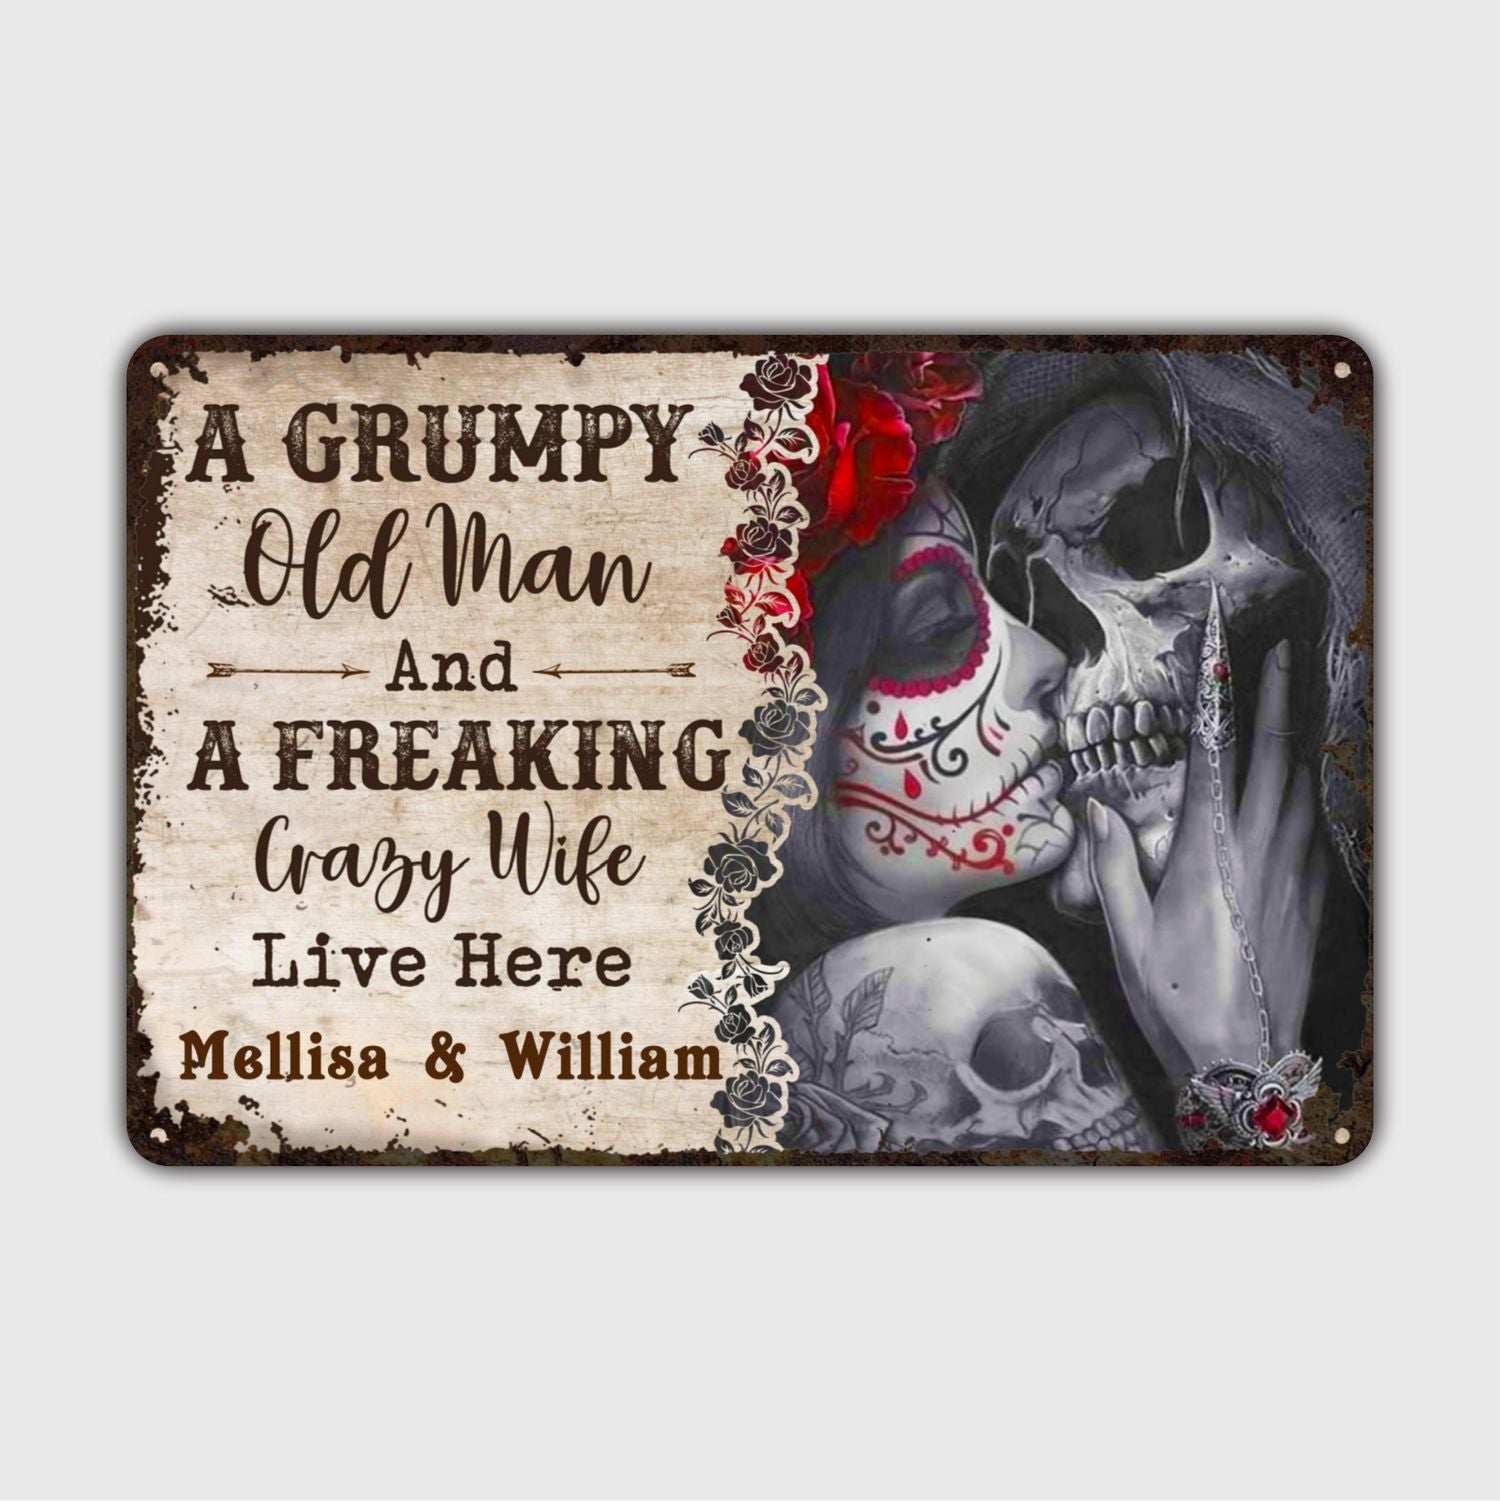 Custom Metal Sign - Gift For Couples - A Grumpy Old Man And A Freaking Crazy Wife Live Here